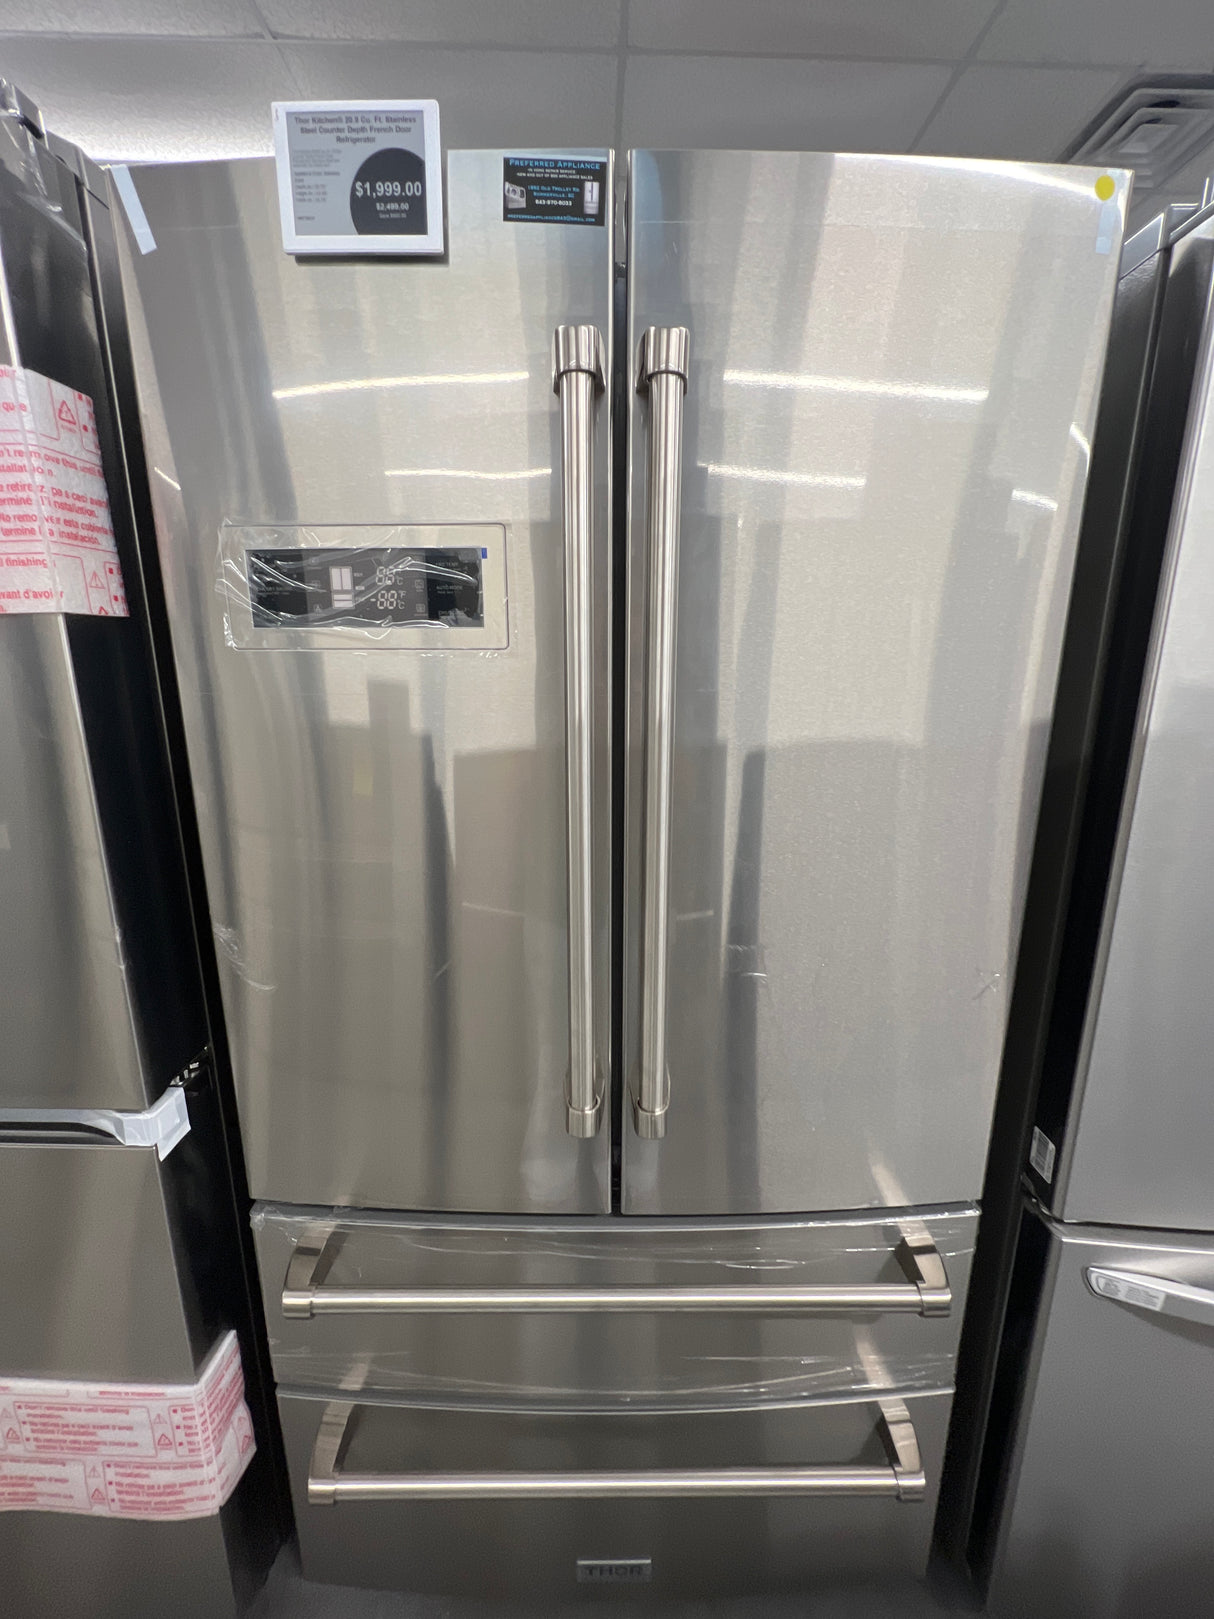 HRF3601F Thor kitchen, 20.9 ft.³ stainless steel counter depth French door refrigerator.